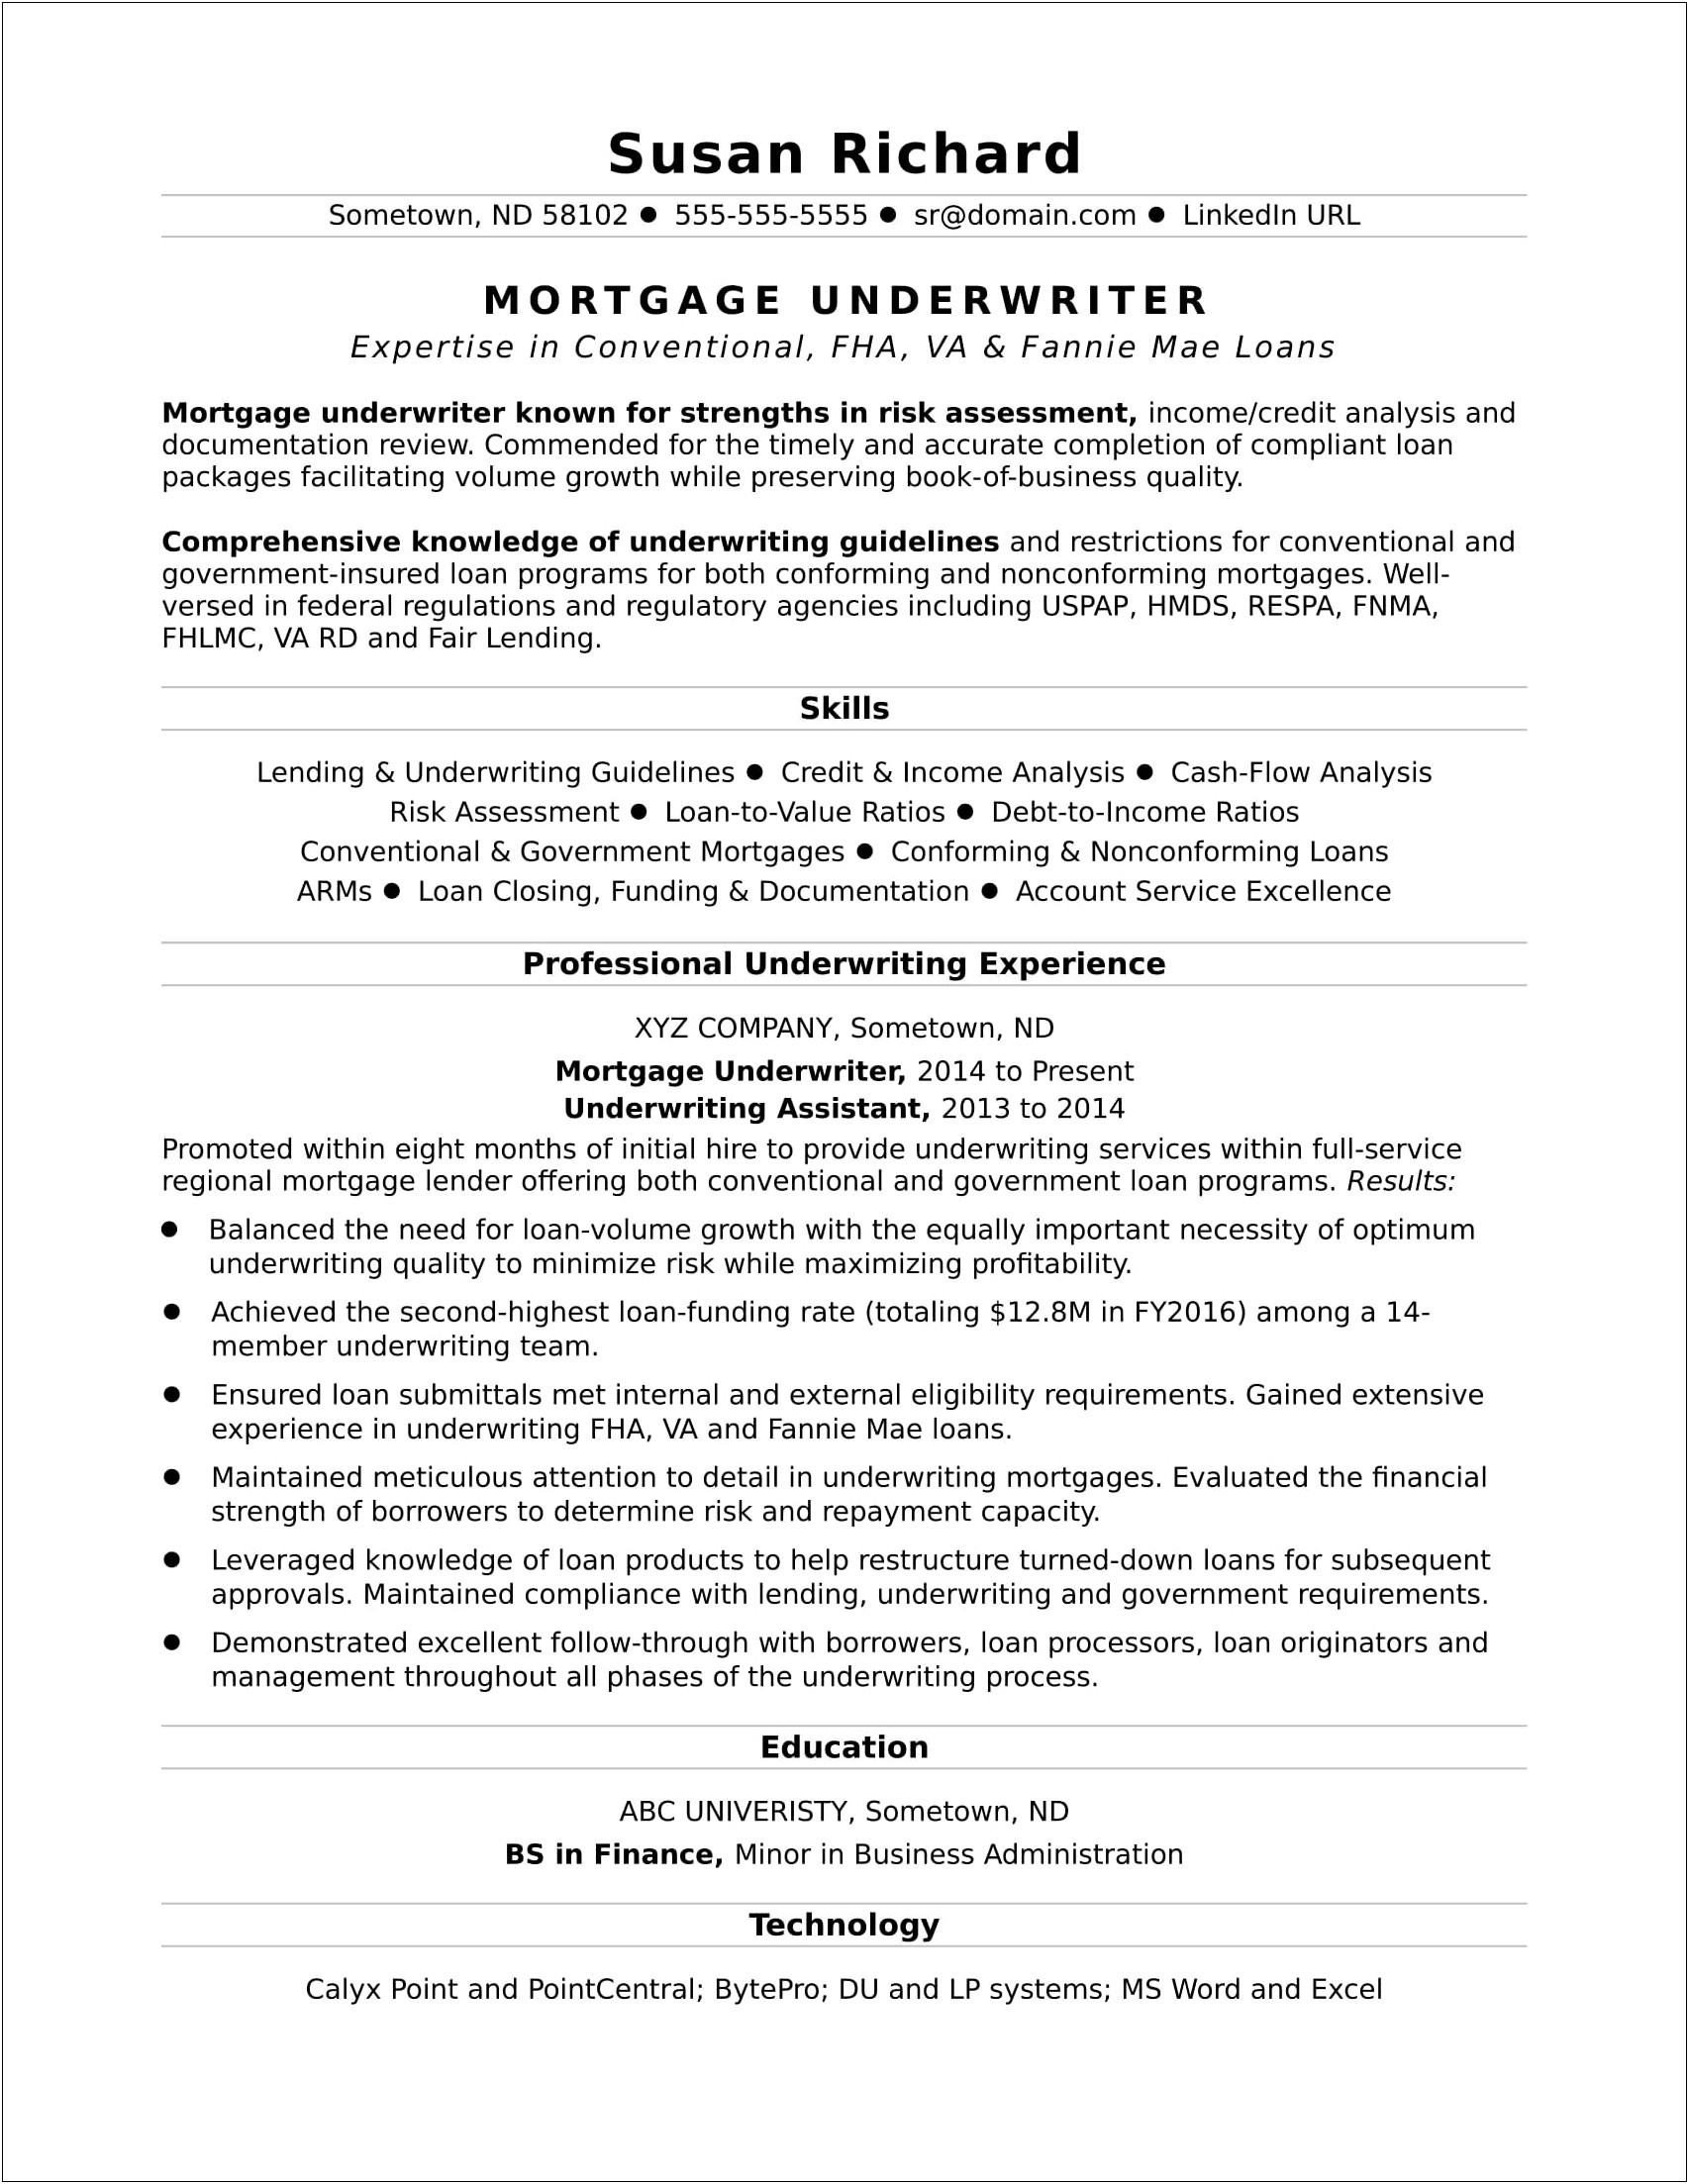 An Example Resume Of Trainer For Loan Company